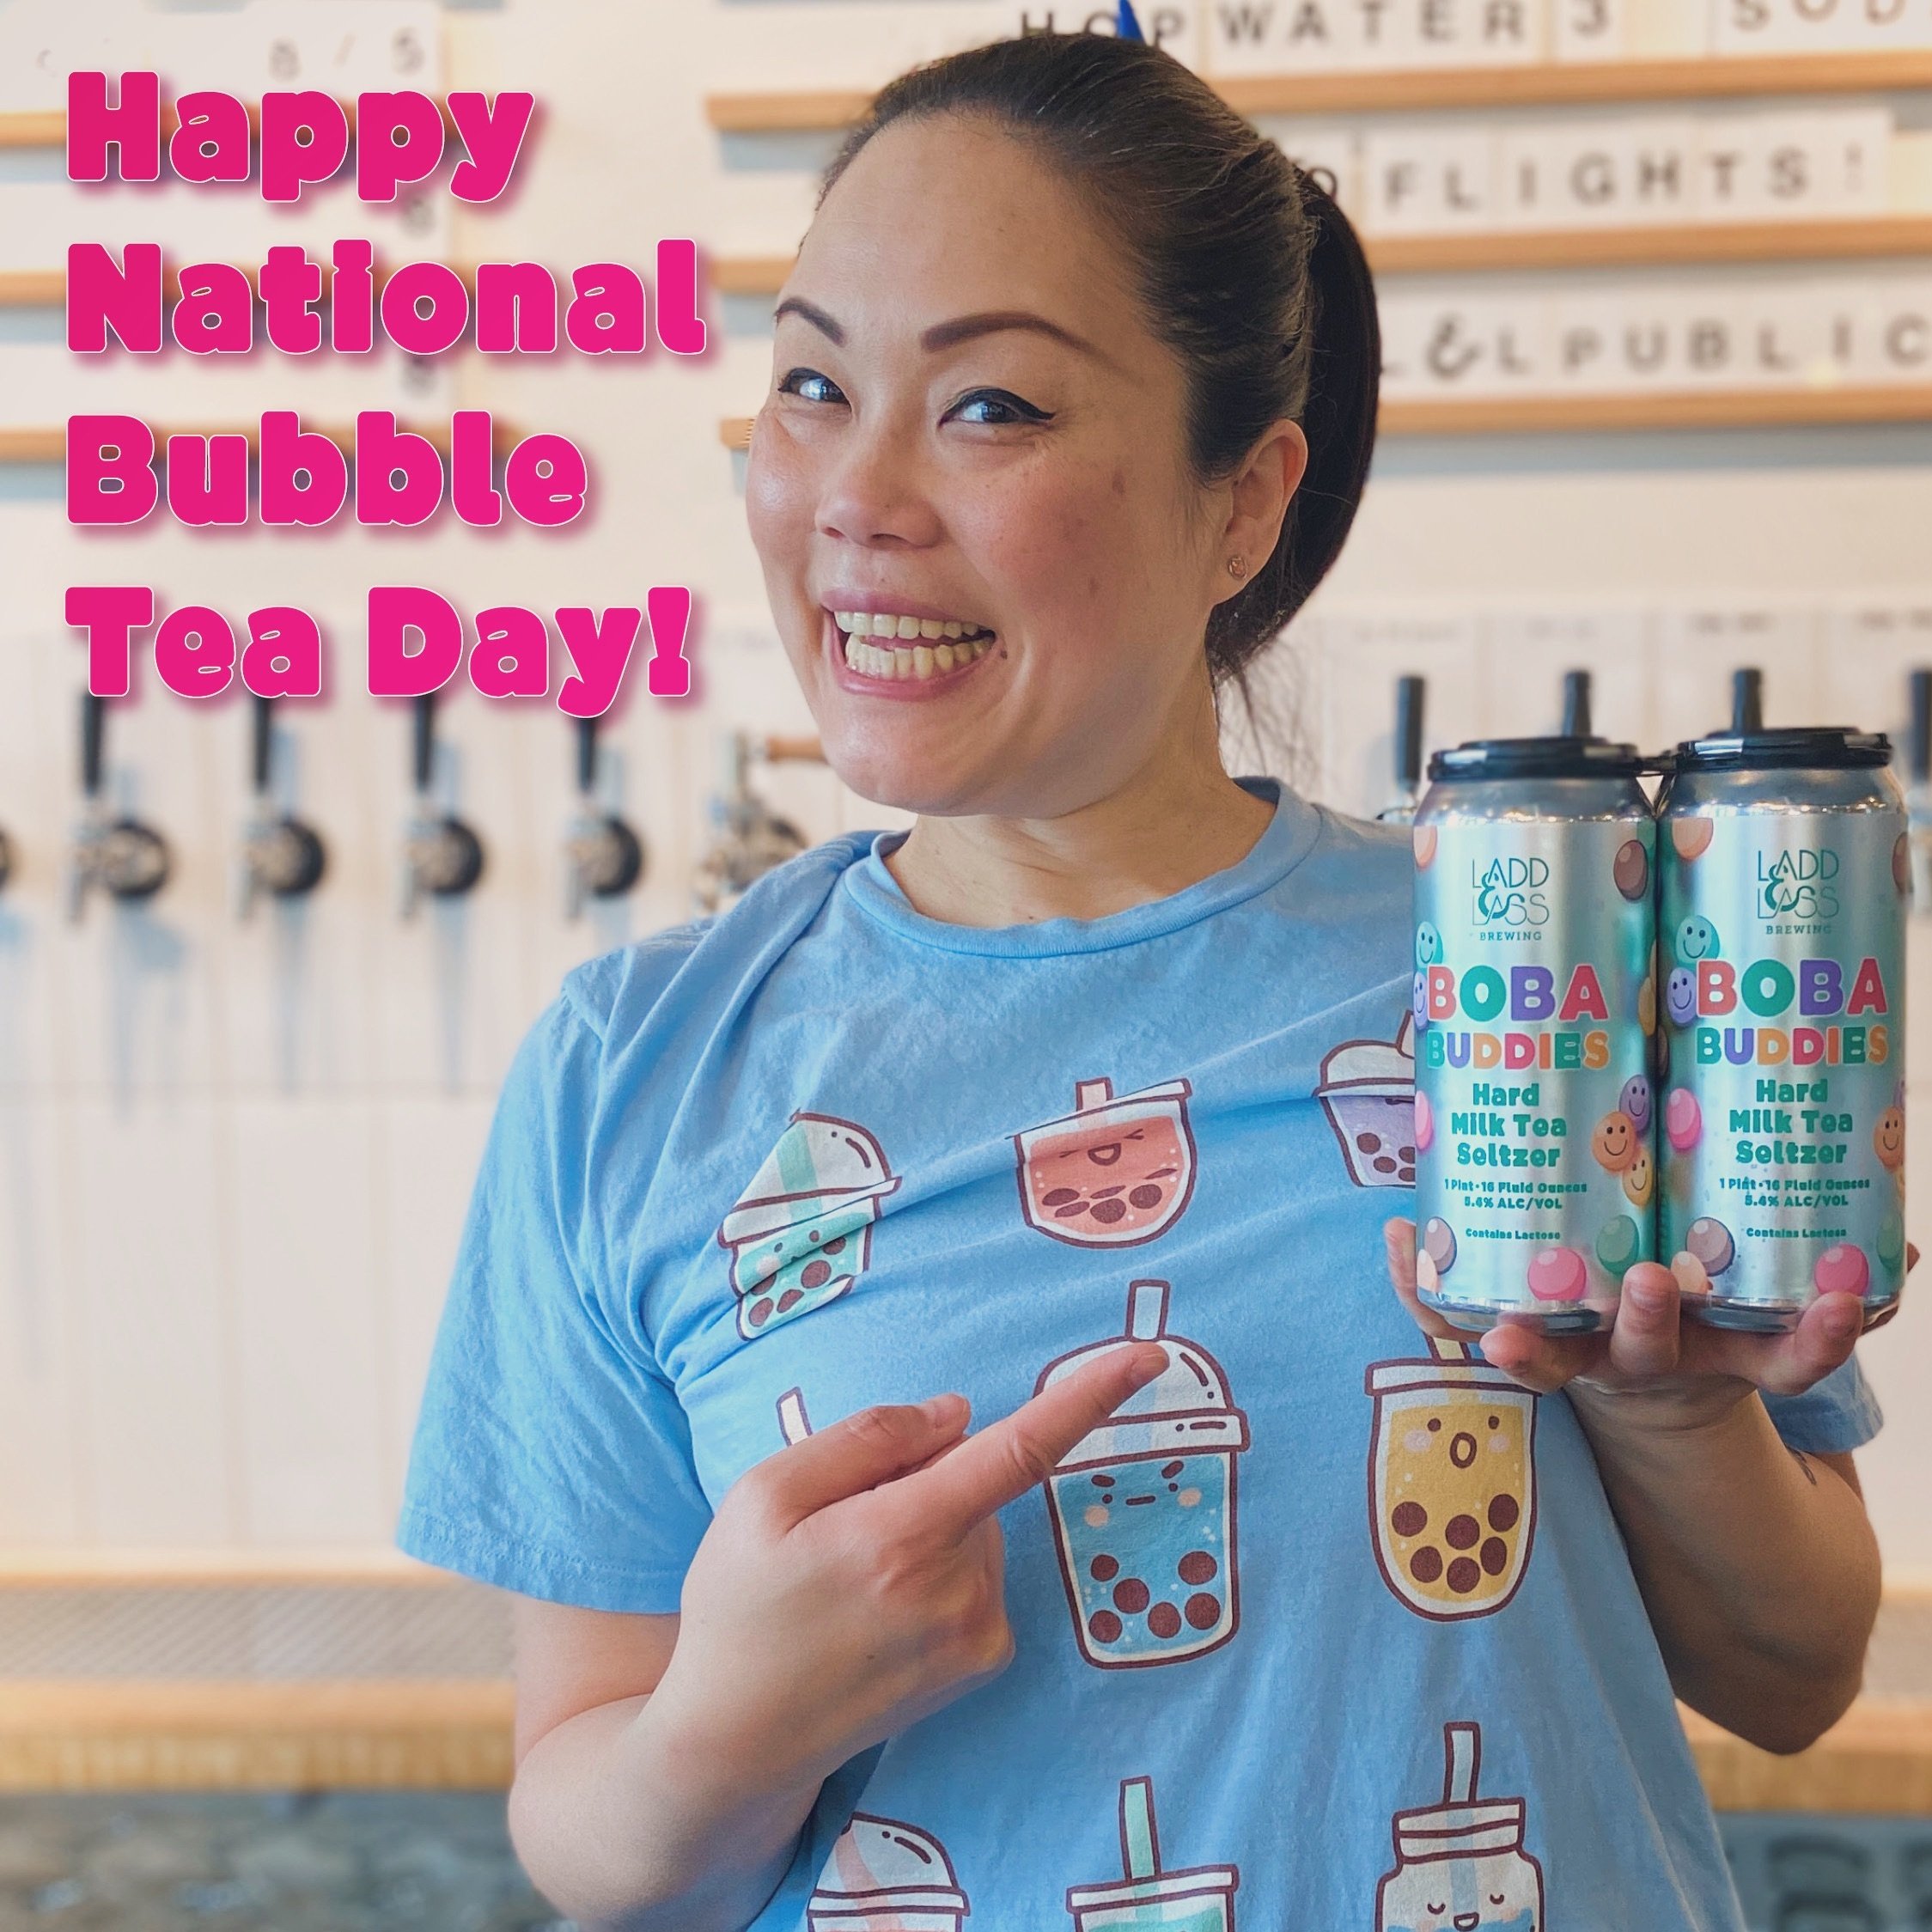 Happy National Bubble Tea Day!🧋!🧋!

Thank you, thank you to ALL of you that braved the weather on Saturday to partake in our special @udistrictpartnership Boba Fest milk tea seltzer flight! We had an AWESOME time pouring for you.

Good news? Our OG